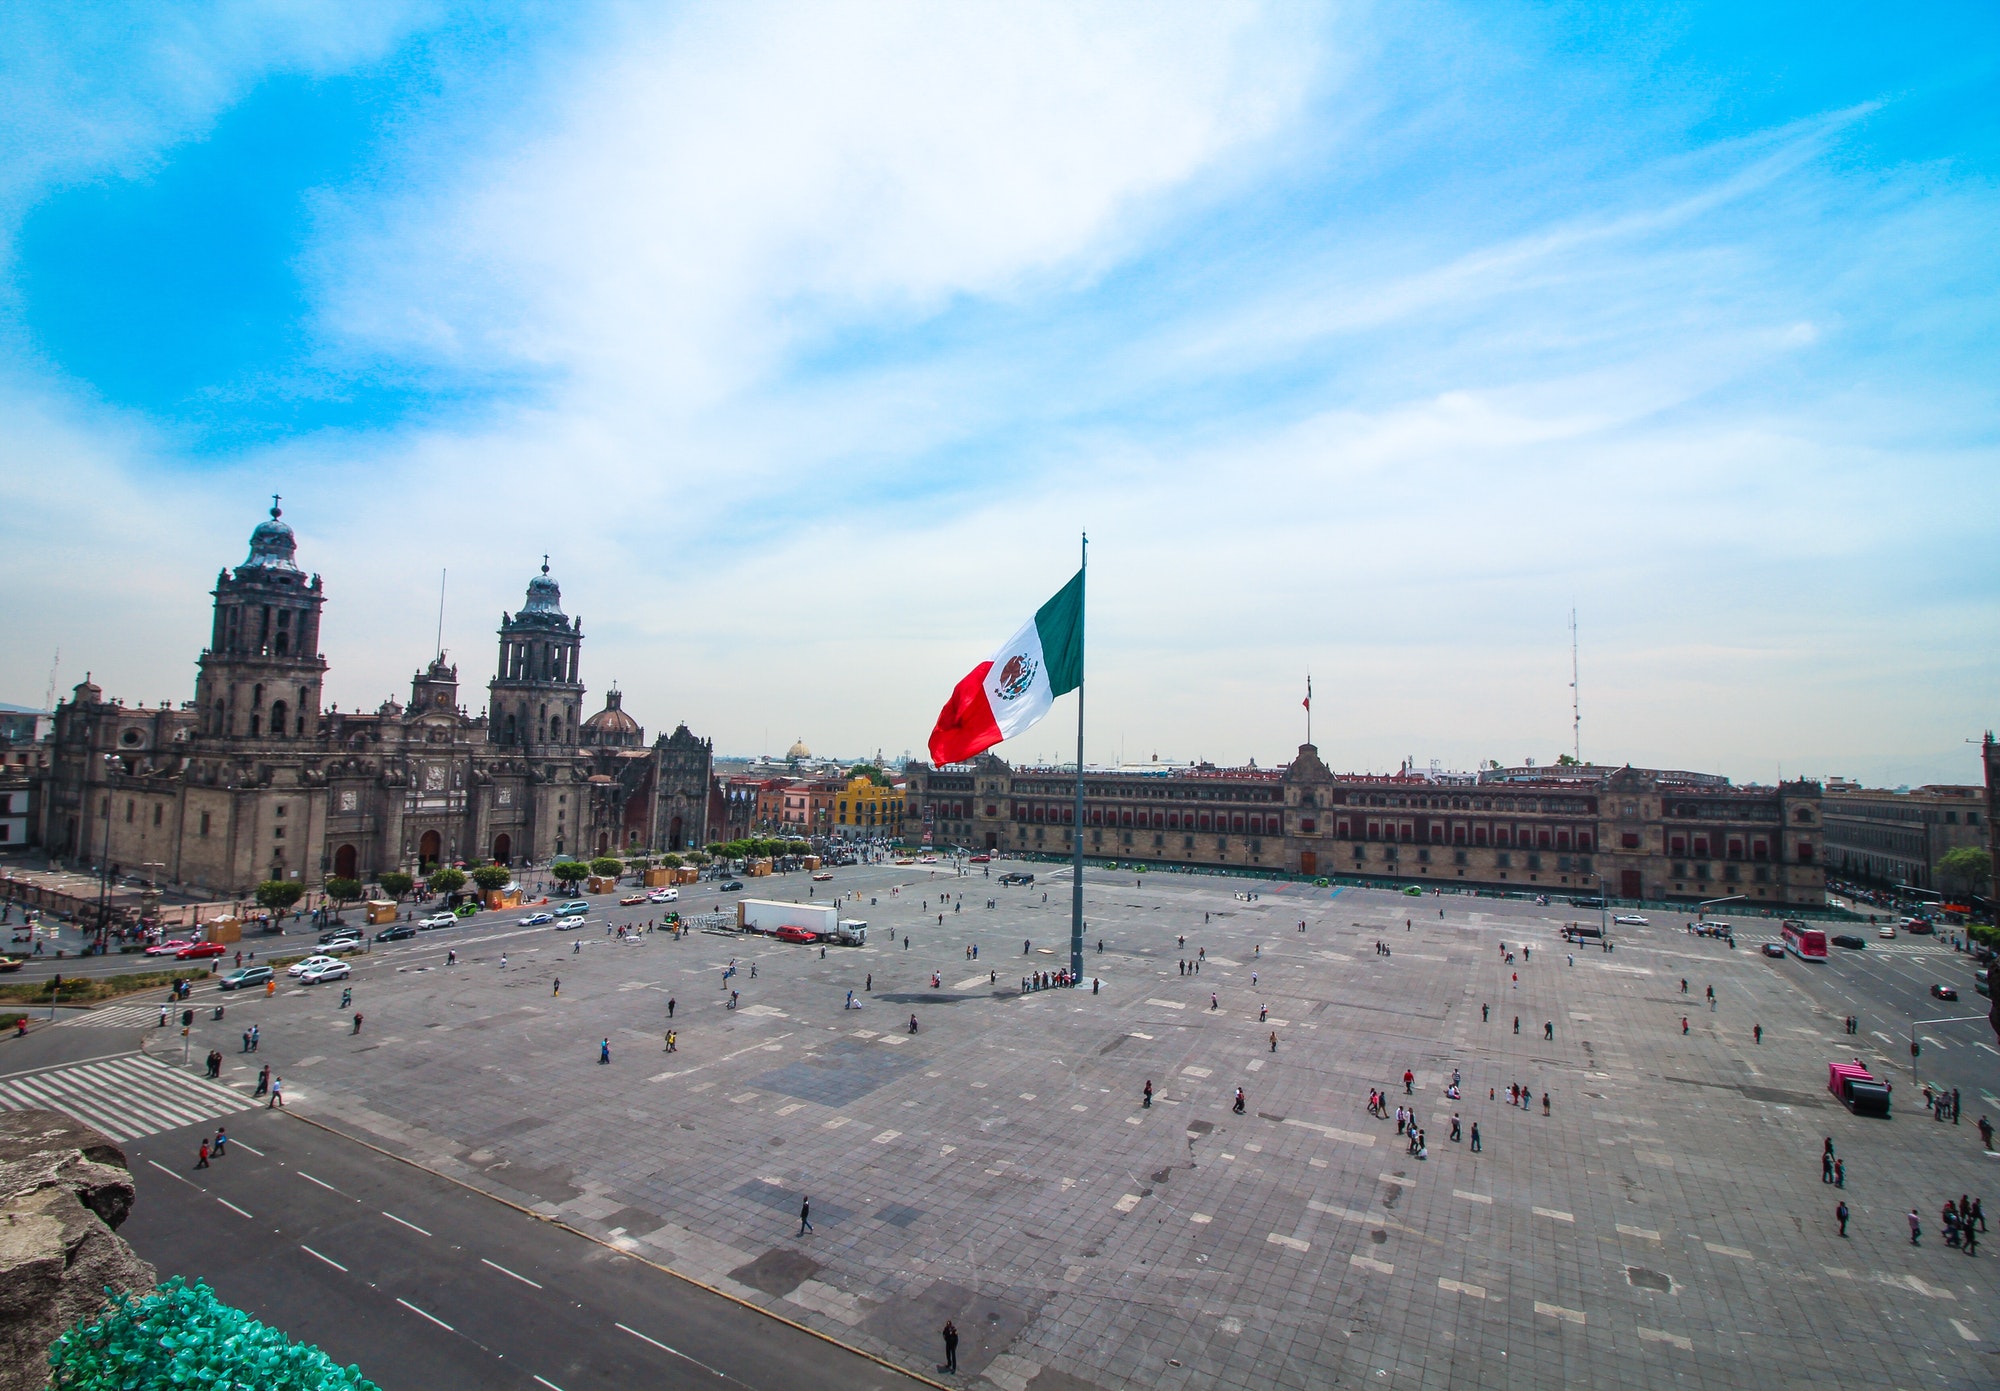 Mexican flag waving in Mexico’s centro histórico with cathedral and presidential palace in the back.